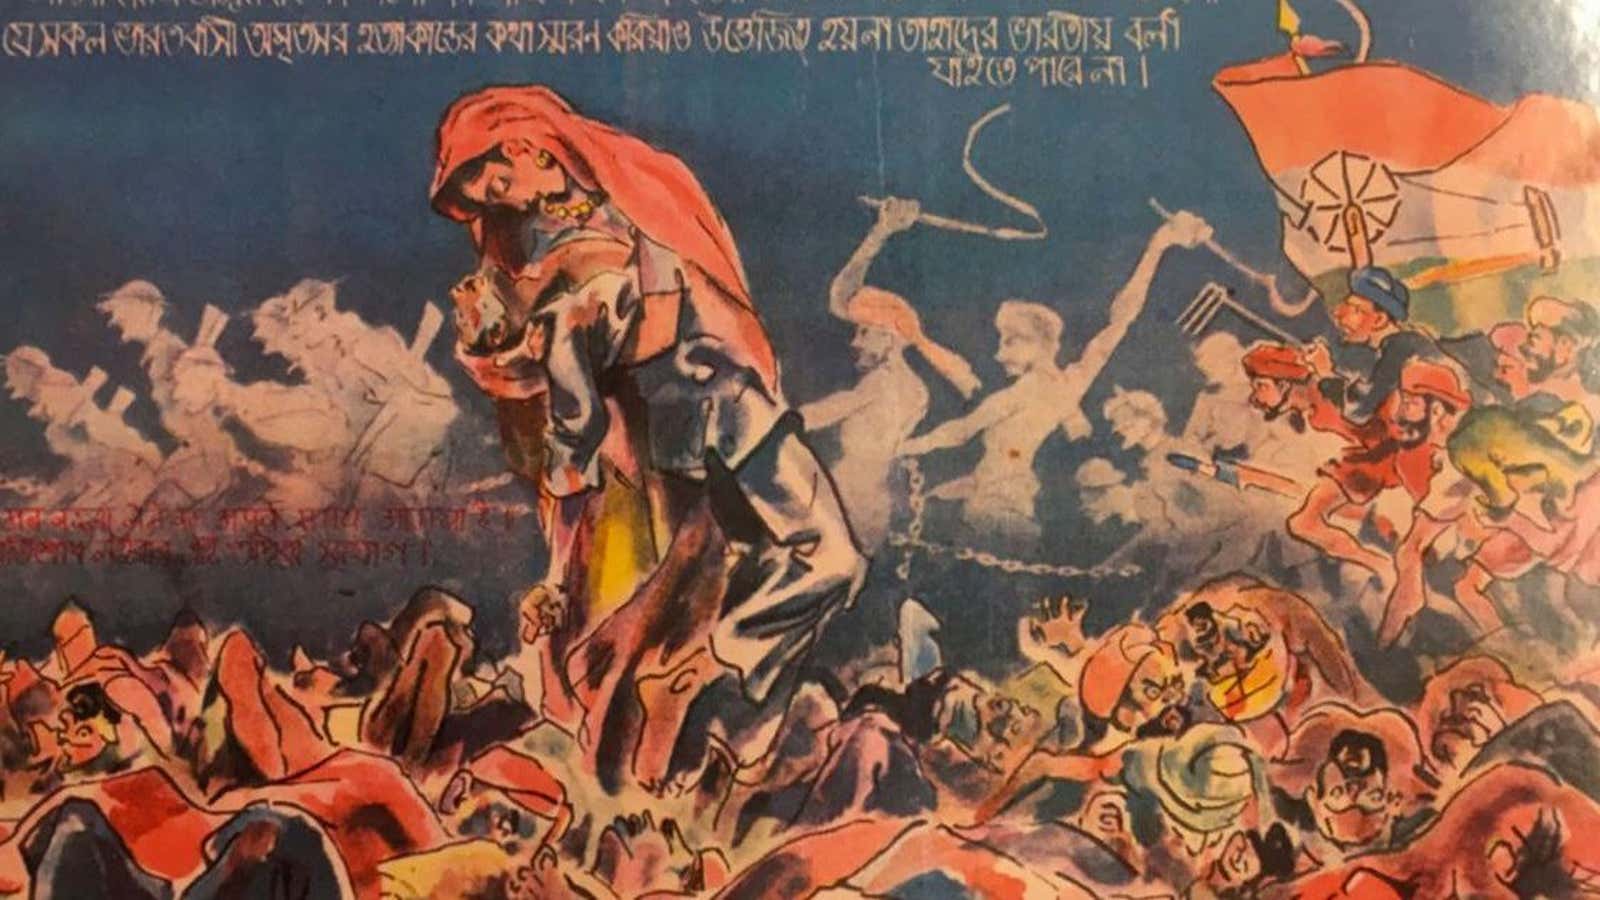 A woman, perhaps the embodiment of Mother India, holds a dying man admist a sea of bodies at the Jallianwalah Bagh massacre, 1919. The text in Hindi and Bengali reads, “Any Indian whose blood doesn’t boil at the memory of the Amritsar massacre cannot be called an Indian. This is the golden opportunity for revenge.”